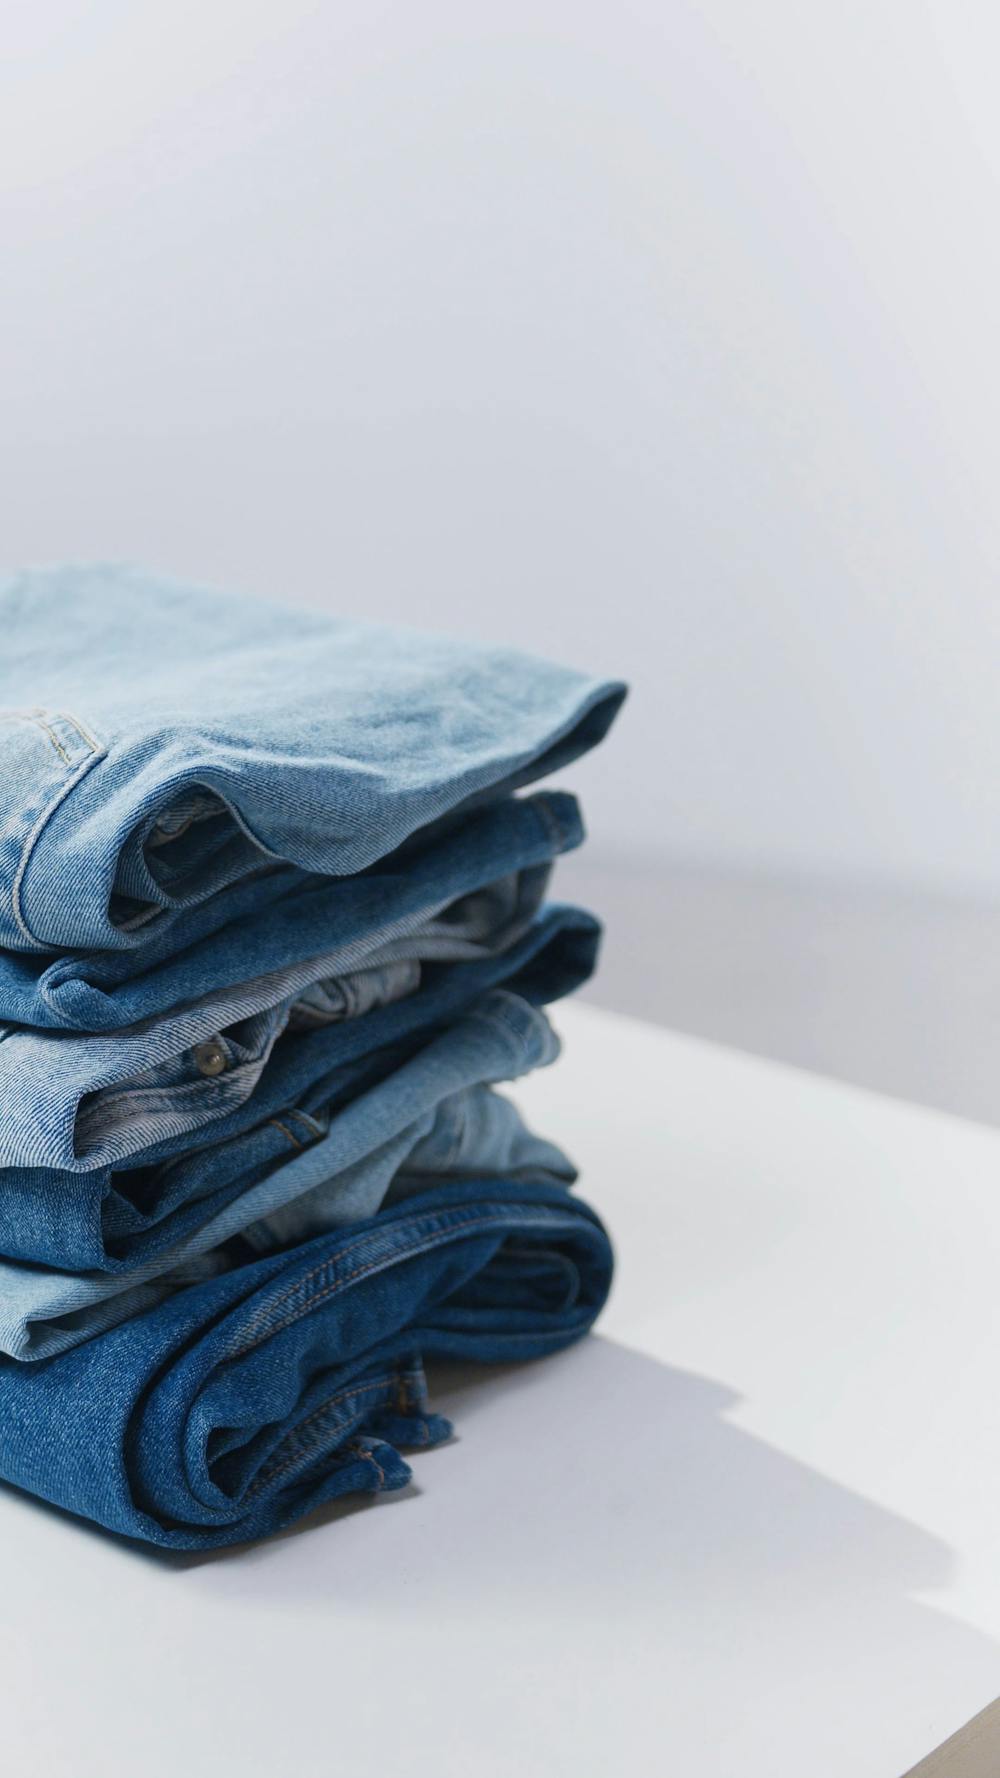 Denim Jeans on the Table · Free Stock Video